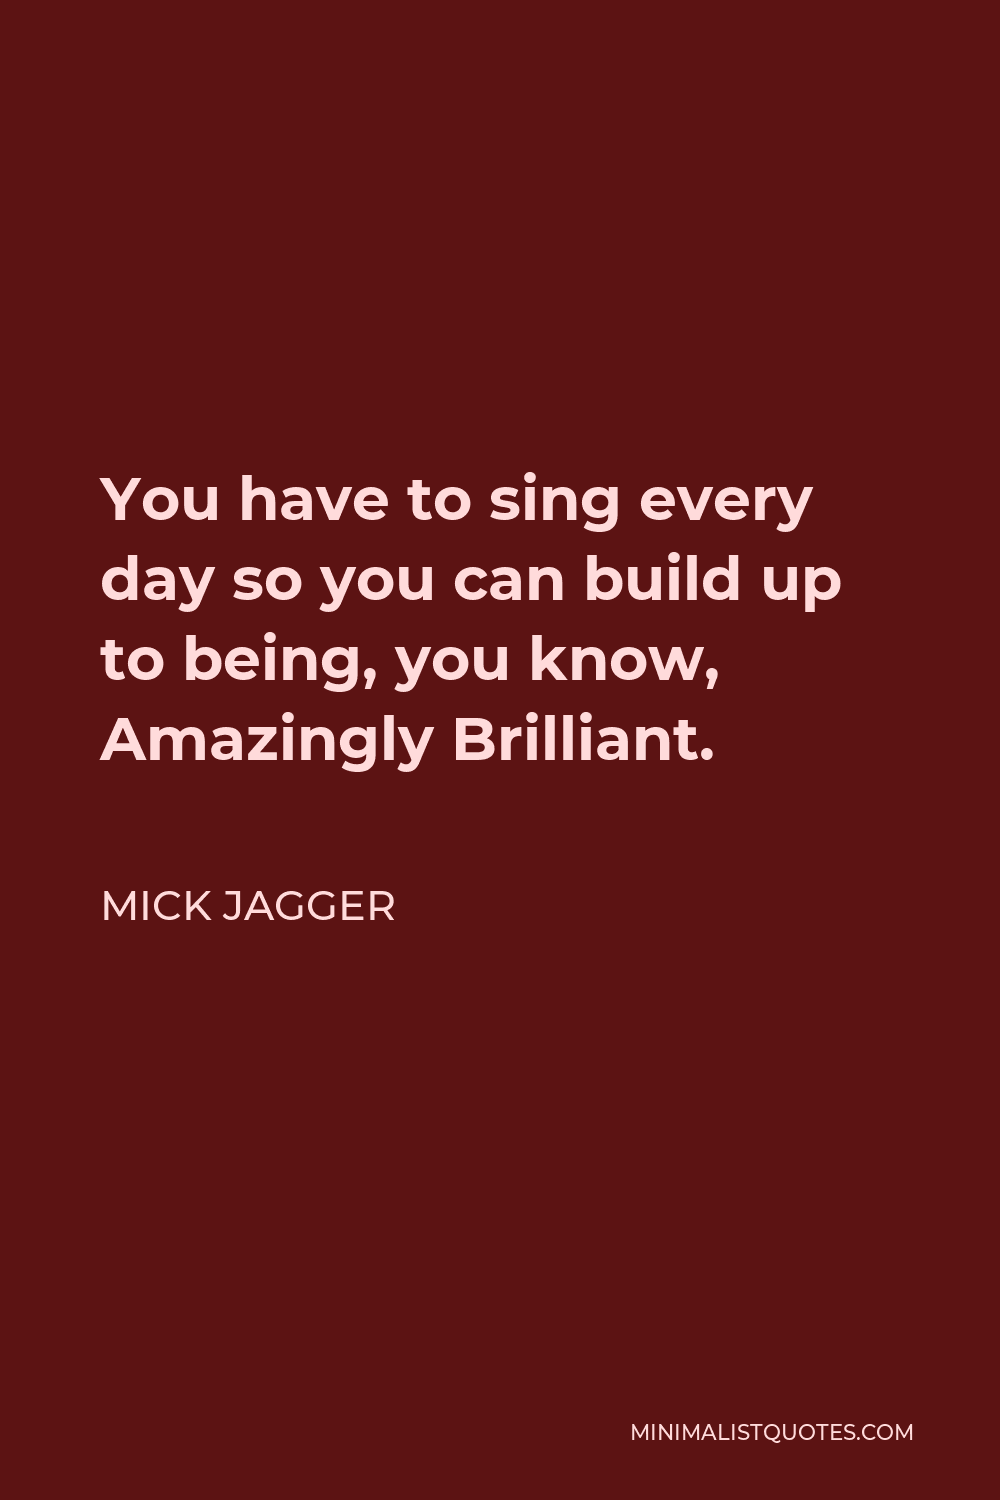 Mick Jagger Quote - You have to sing every day so you can build up to being, you know, Amazingly Brilliant.